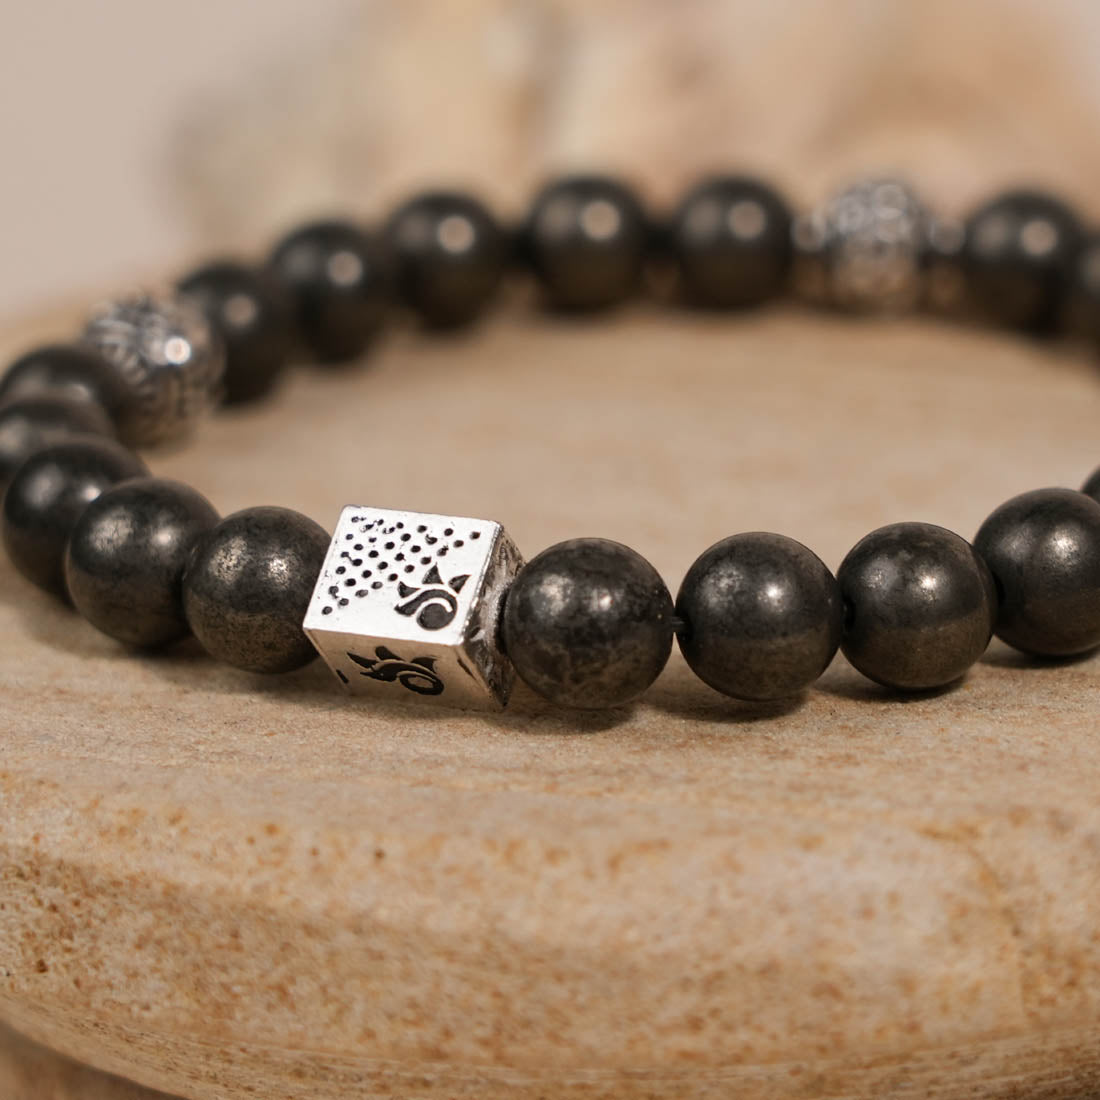 Pyrite Stone with Om Silver Beads Bracelet